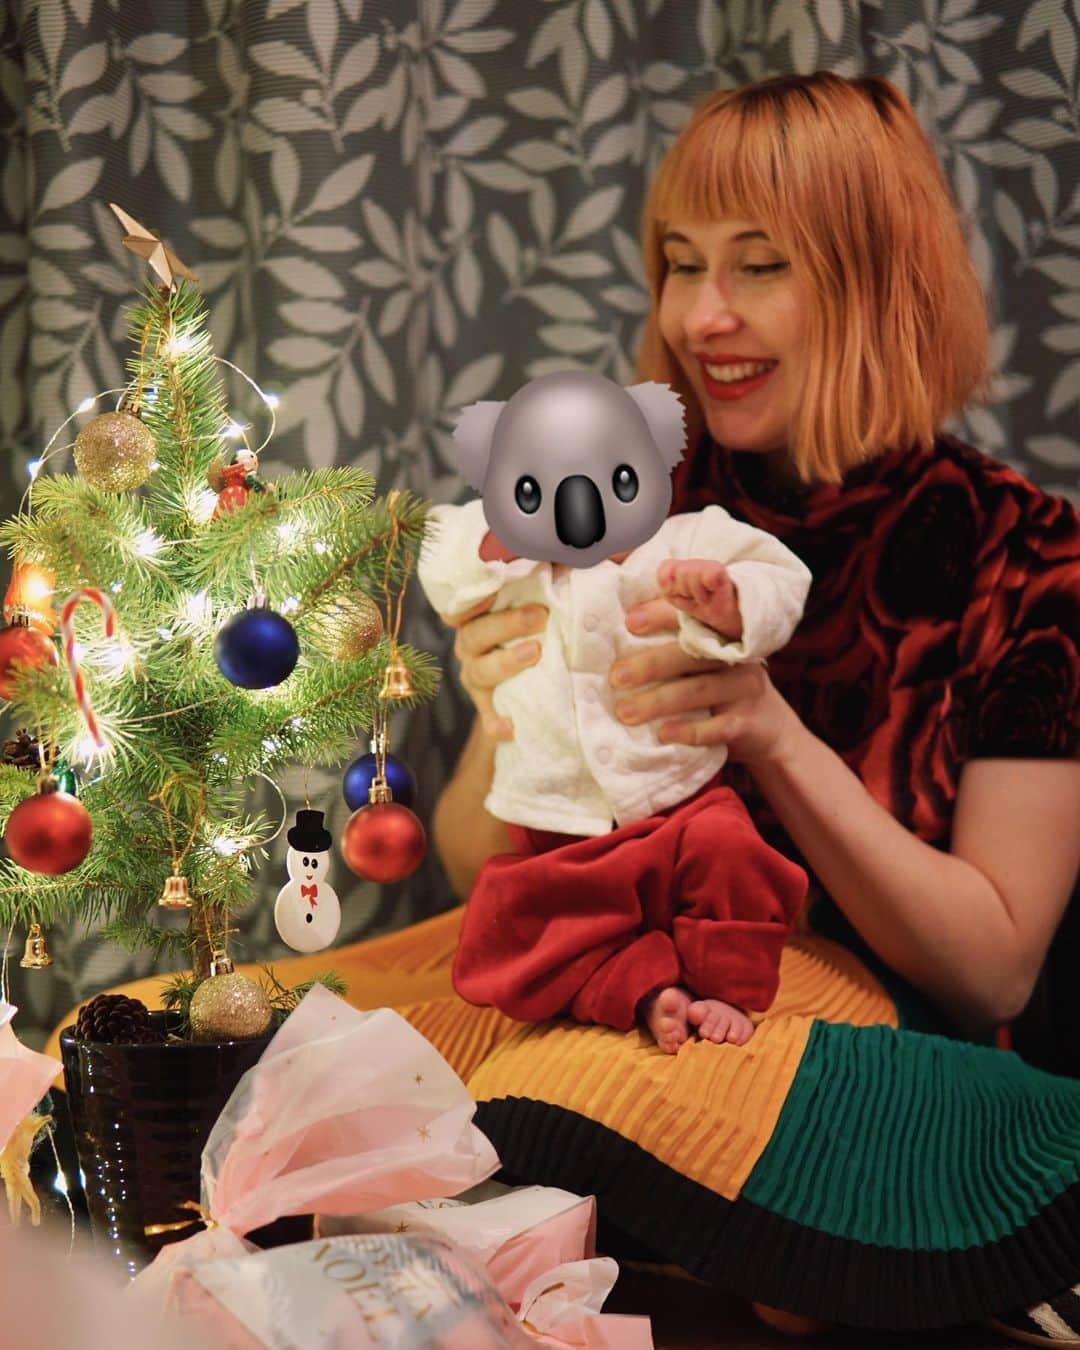 Anji SALZのインスタグラム：「Late to the party - but wishing everyone a lovely Christmas season! Hopefully you were or are able to see your beloved ones during these times or at least can see them safely soon 🥰🎄 This was our first Christmas with our new addition to the family. Little Salz was so kind to sleep most of the day so I was able to bake a cake, cook and eat with a friend and cousin, who otherwise would have been alone during Christmas 🎄😢 We kept it as safe as possible in a small circle and a lot of disinfectant and masks 😷   メリークリスマス🎄🎁 ミニザルツちゃんと同じサイズのクリスマスツリーとの写真。 久しぶりにメイクして、特別は一日を過ごした。 皆さんはクリスマスをどういう風に過ごしたのかな？❤️」